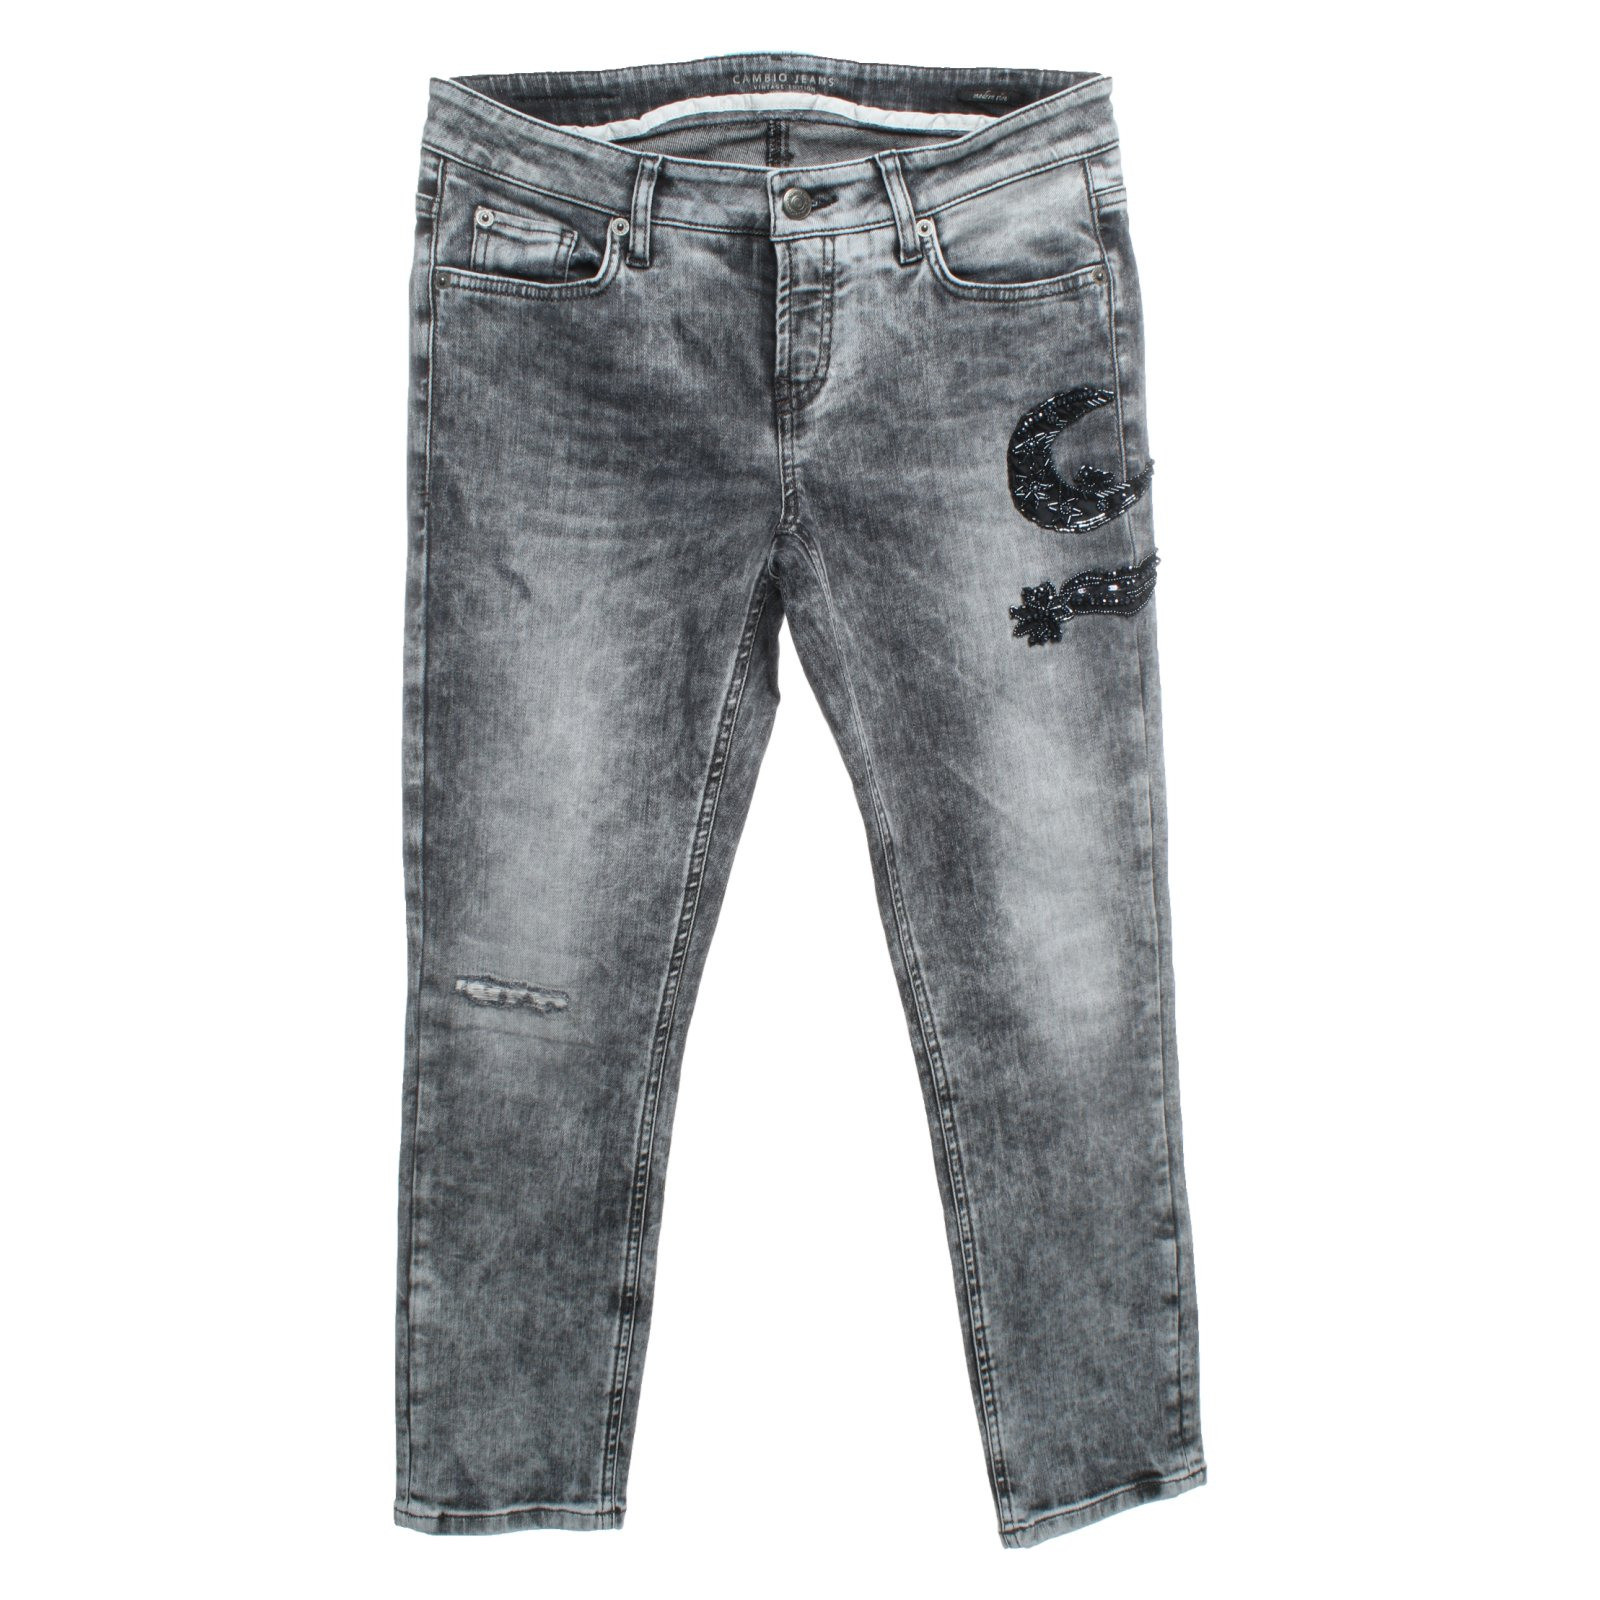 Cambio Jeans in Grey - Second Hand Cambio Jeans in Grey buy used for 40€  (5603504)